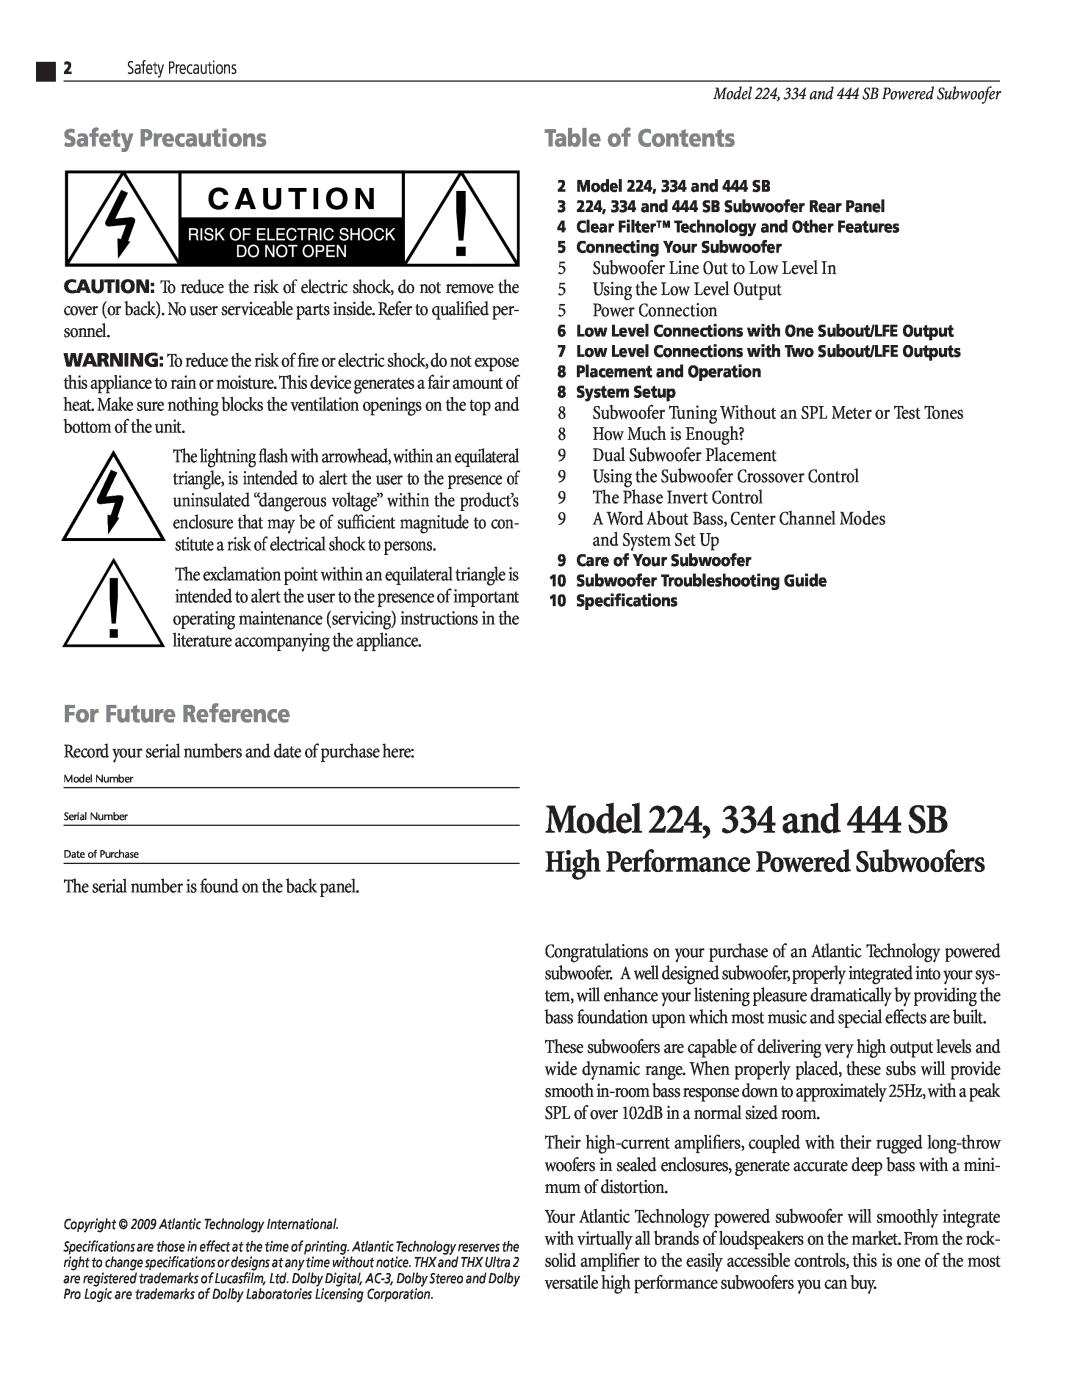 Atlantic Technology 224 SB, 334 SB Safety Precautions, For Future Reference, Model 224, 334 and 444 SB, Table of Contents 